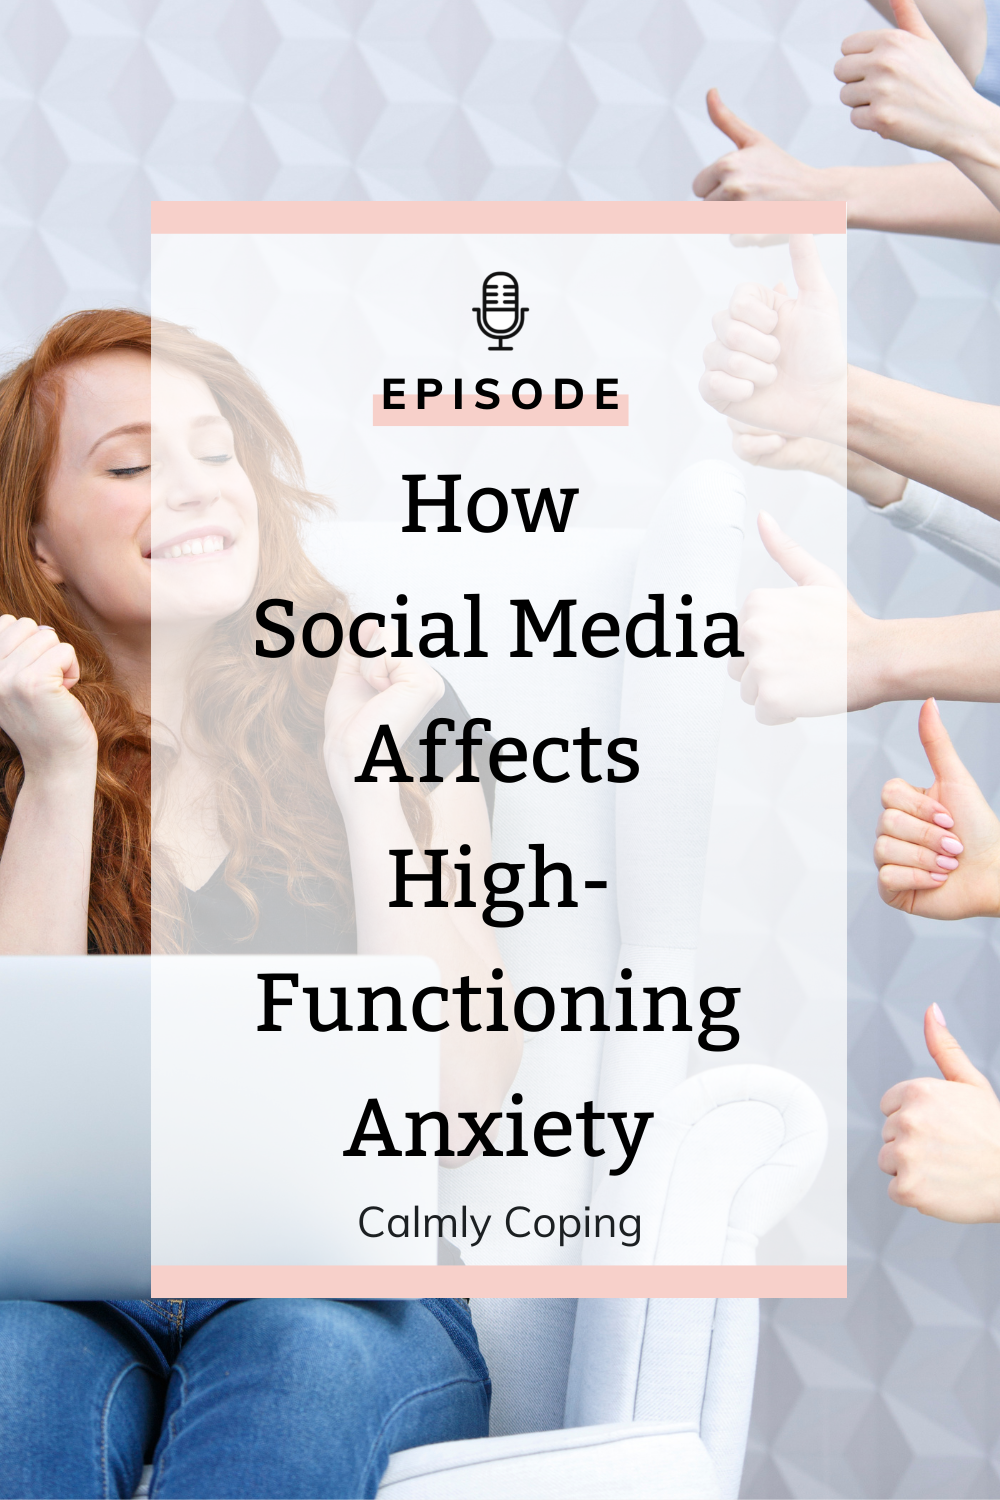 How Social Media Affects High-Functioning Anxiety